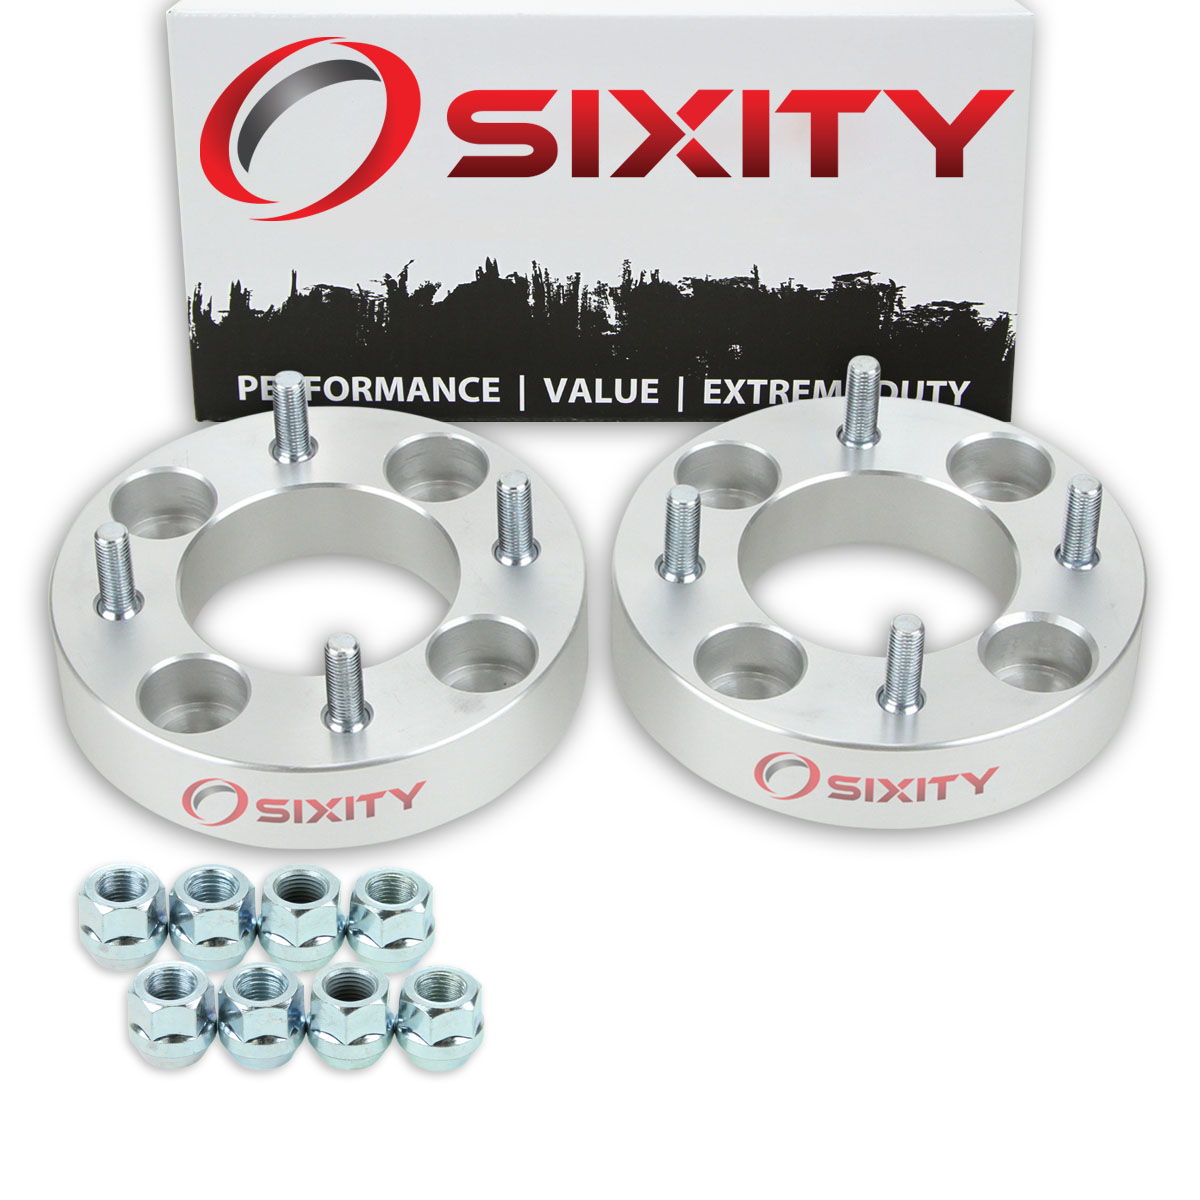 Sixity 2 pc 1.25 Inch 1988-2000 Honda TRX 300 2x4 4/110 Front Wheel Spacers